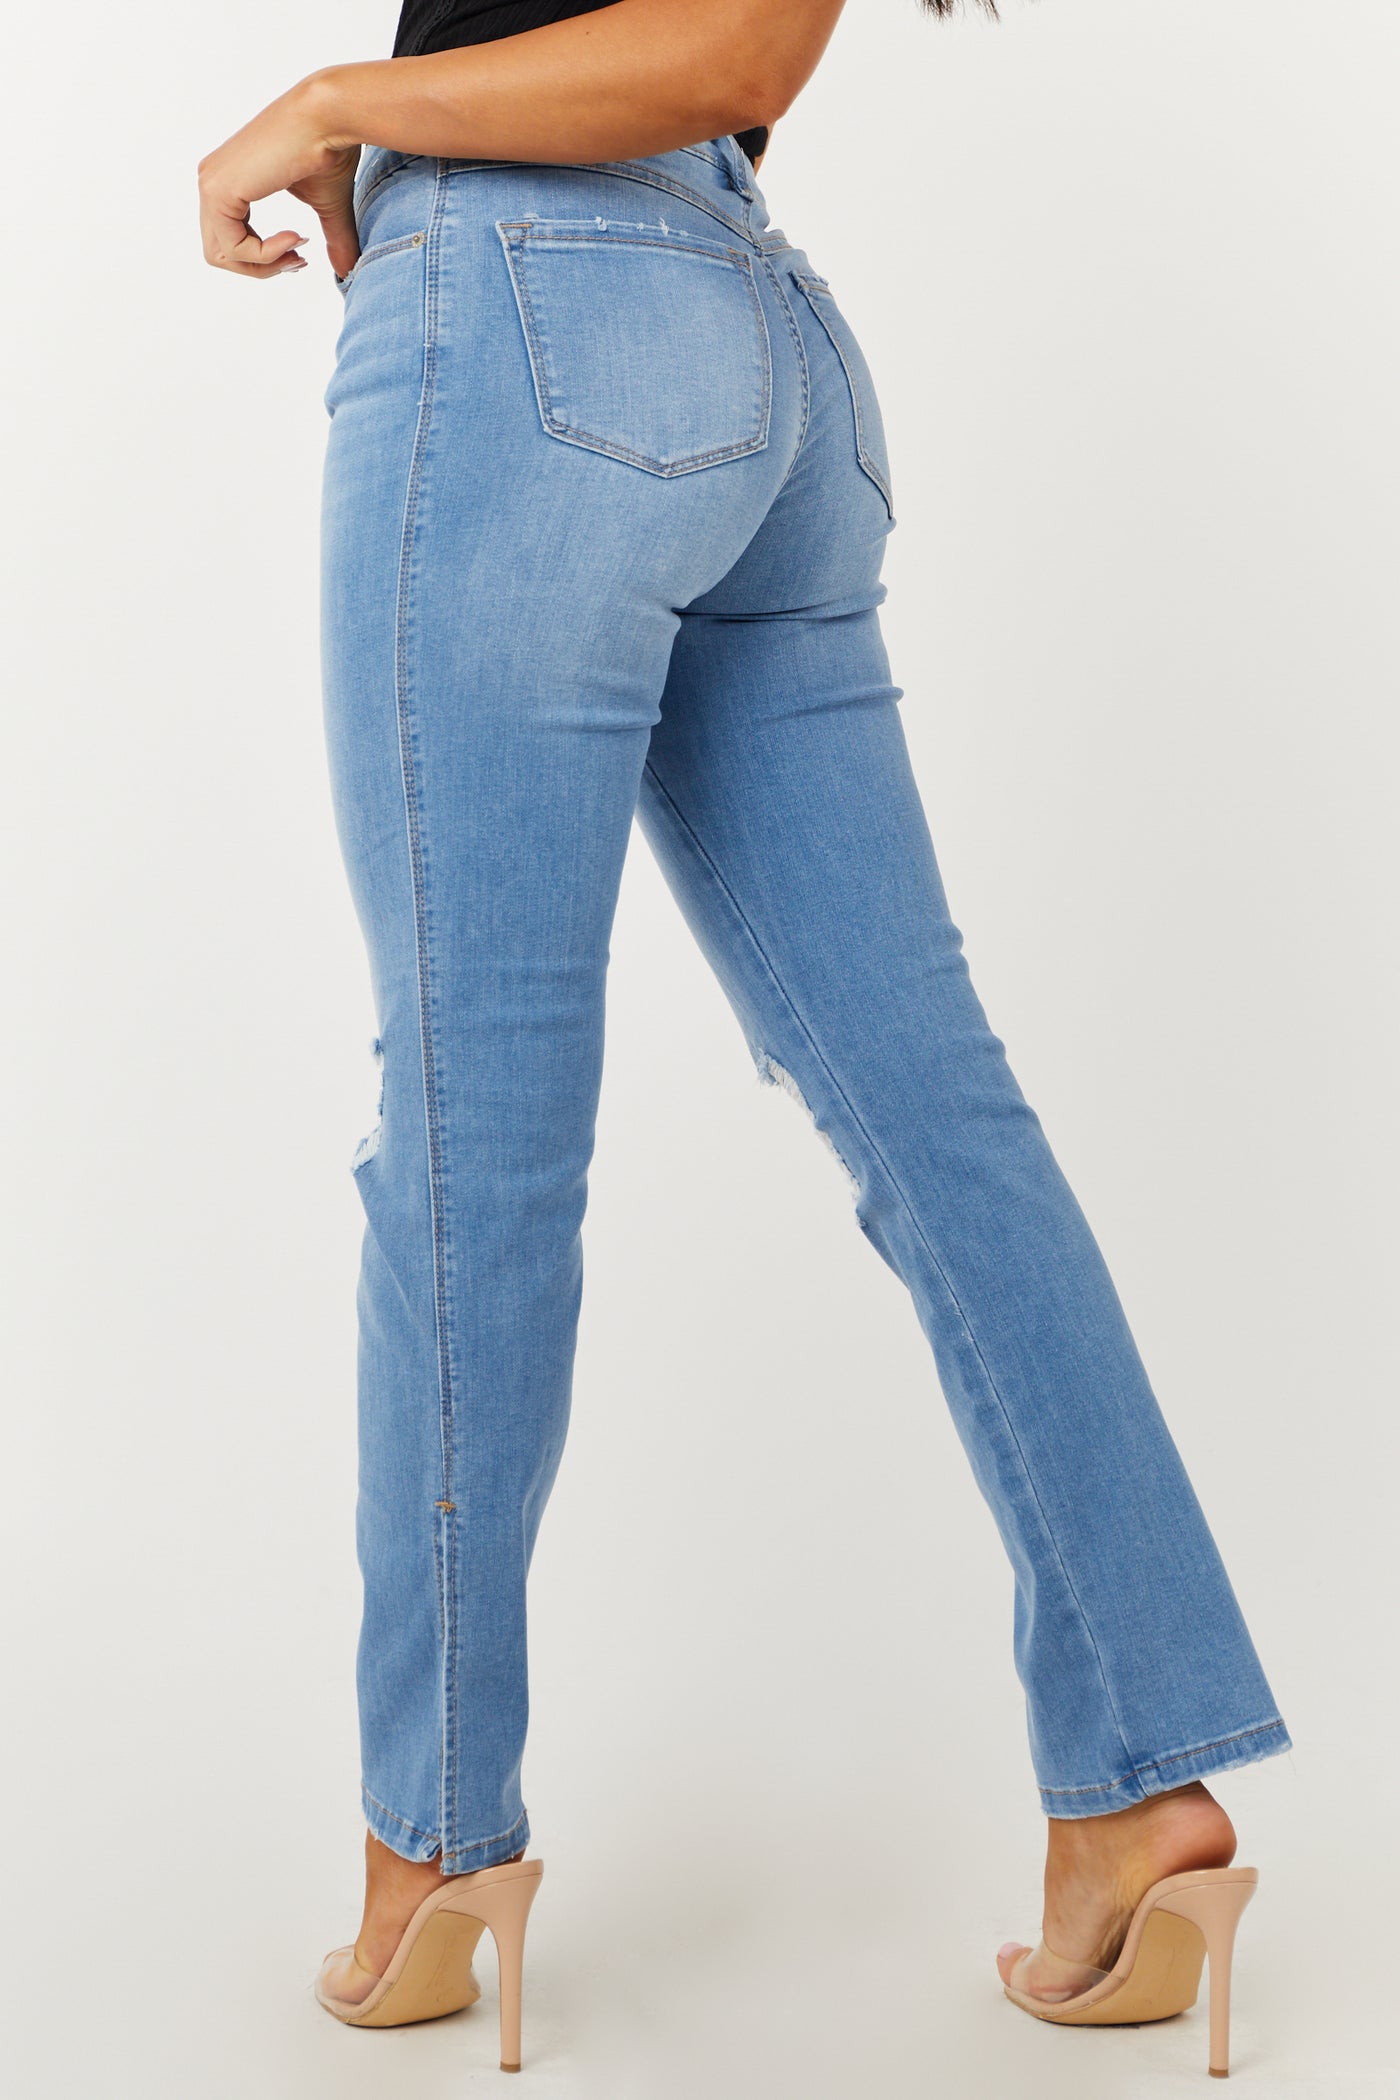 Women's Trendy Bootcut Flare Jeans with Split Leg and Distress Detailing